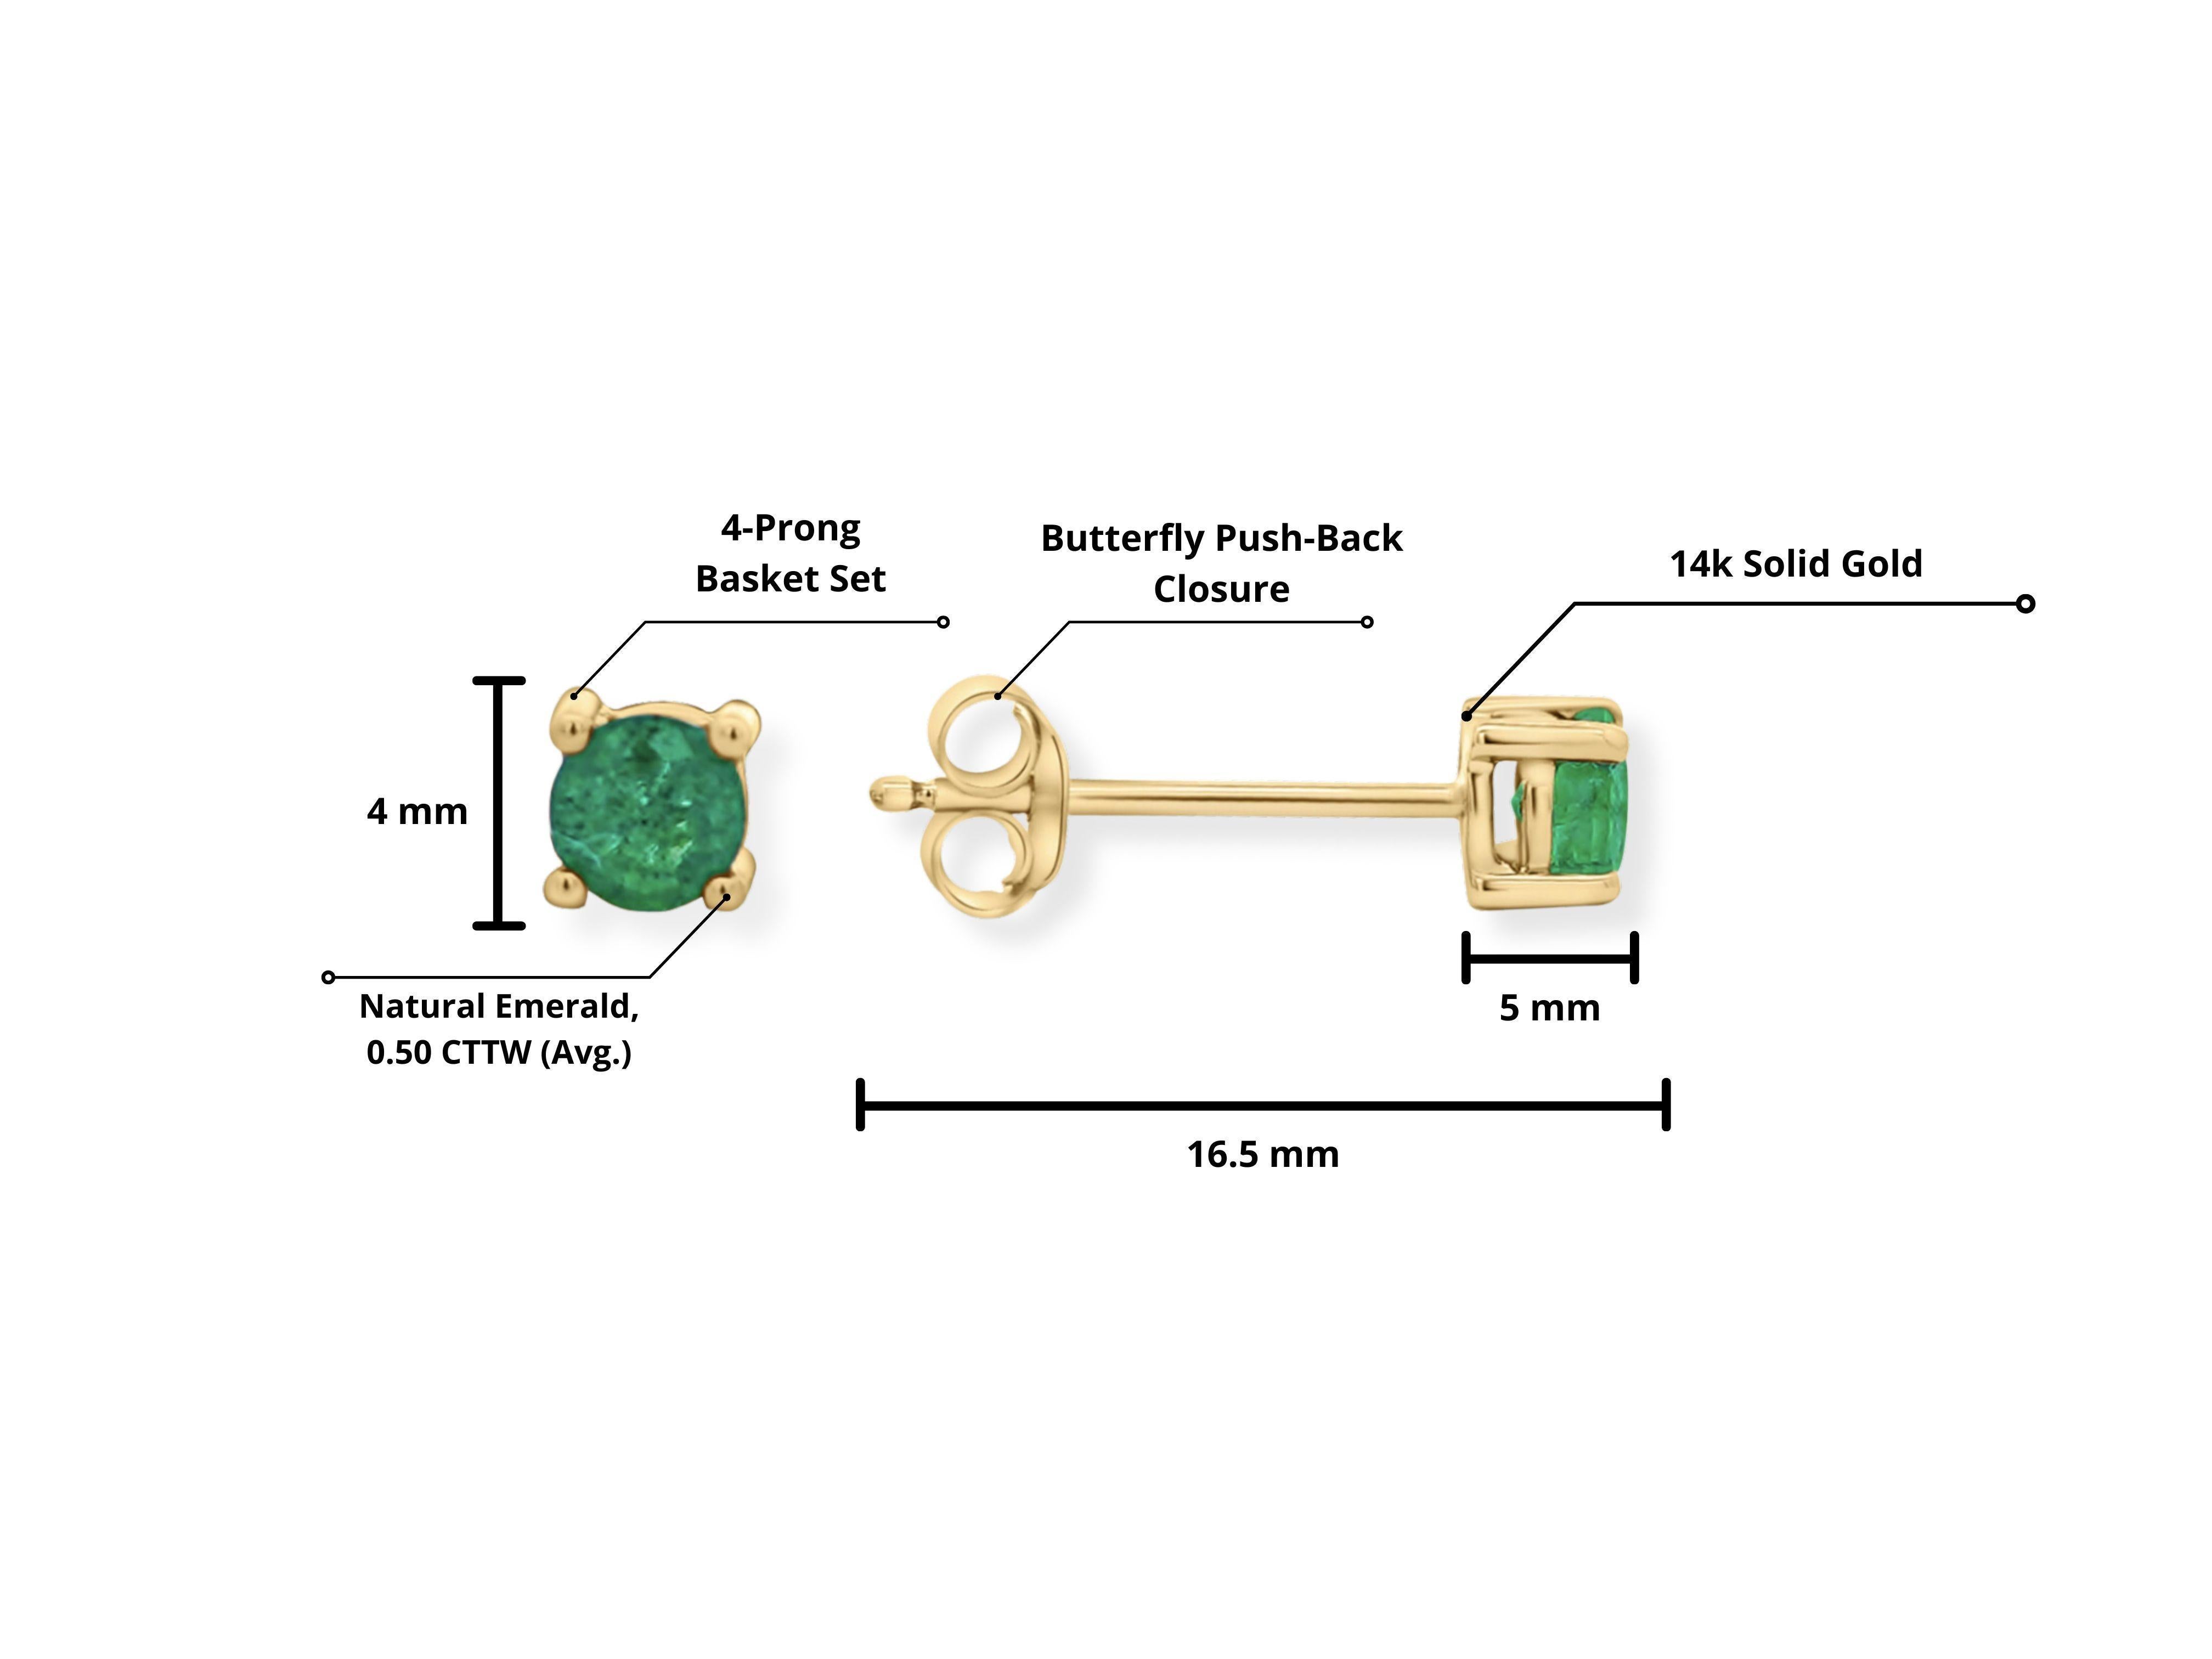 Natural Colombian 1/2 Carat Total Round Cut Emerald Stud Earrings in 14K Solid Yellow Gold 4-Prong Basket Setting.

These earrings are the real thing, for the best price. The emeralds are noticeably natural and full of luster, color, and